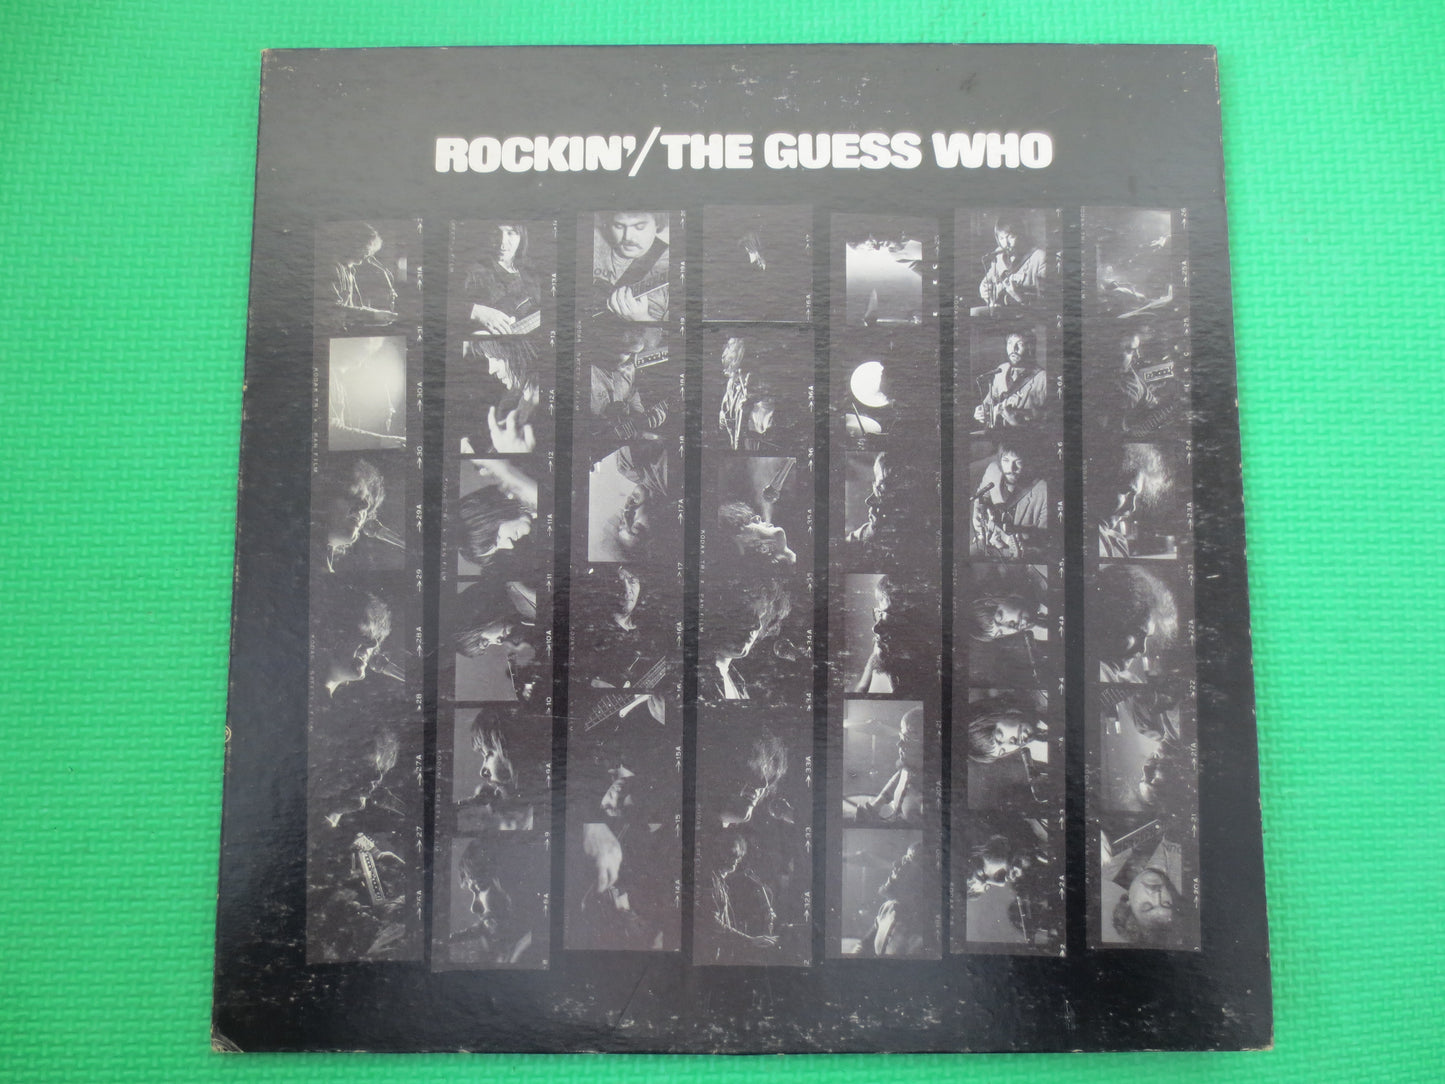 The GUESS WHO, ROCKIN, Rock Record, Rock Vinyl, Vintage Vinyl, Record Vinyl, lps, Vinyl Record, Vinyl Album, 1972 Records